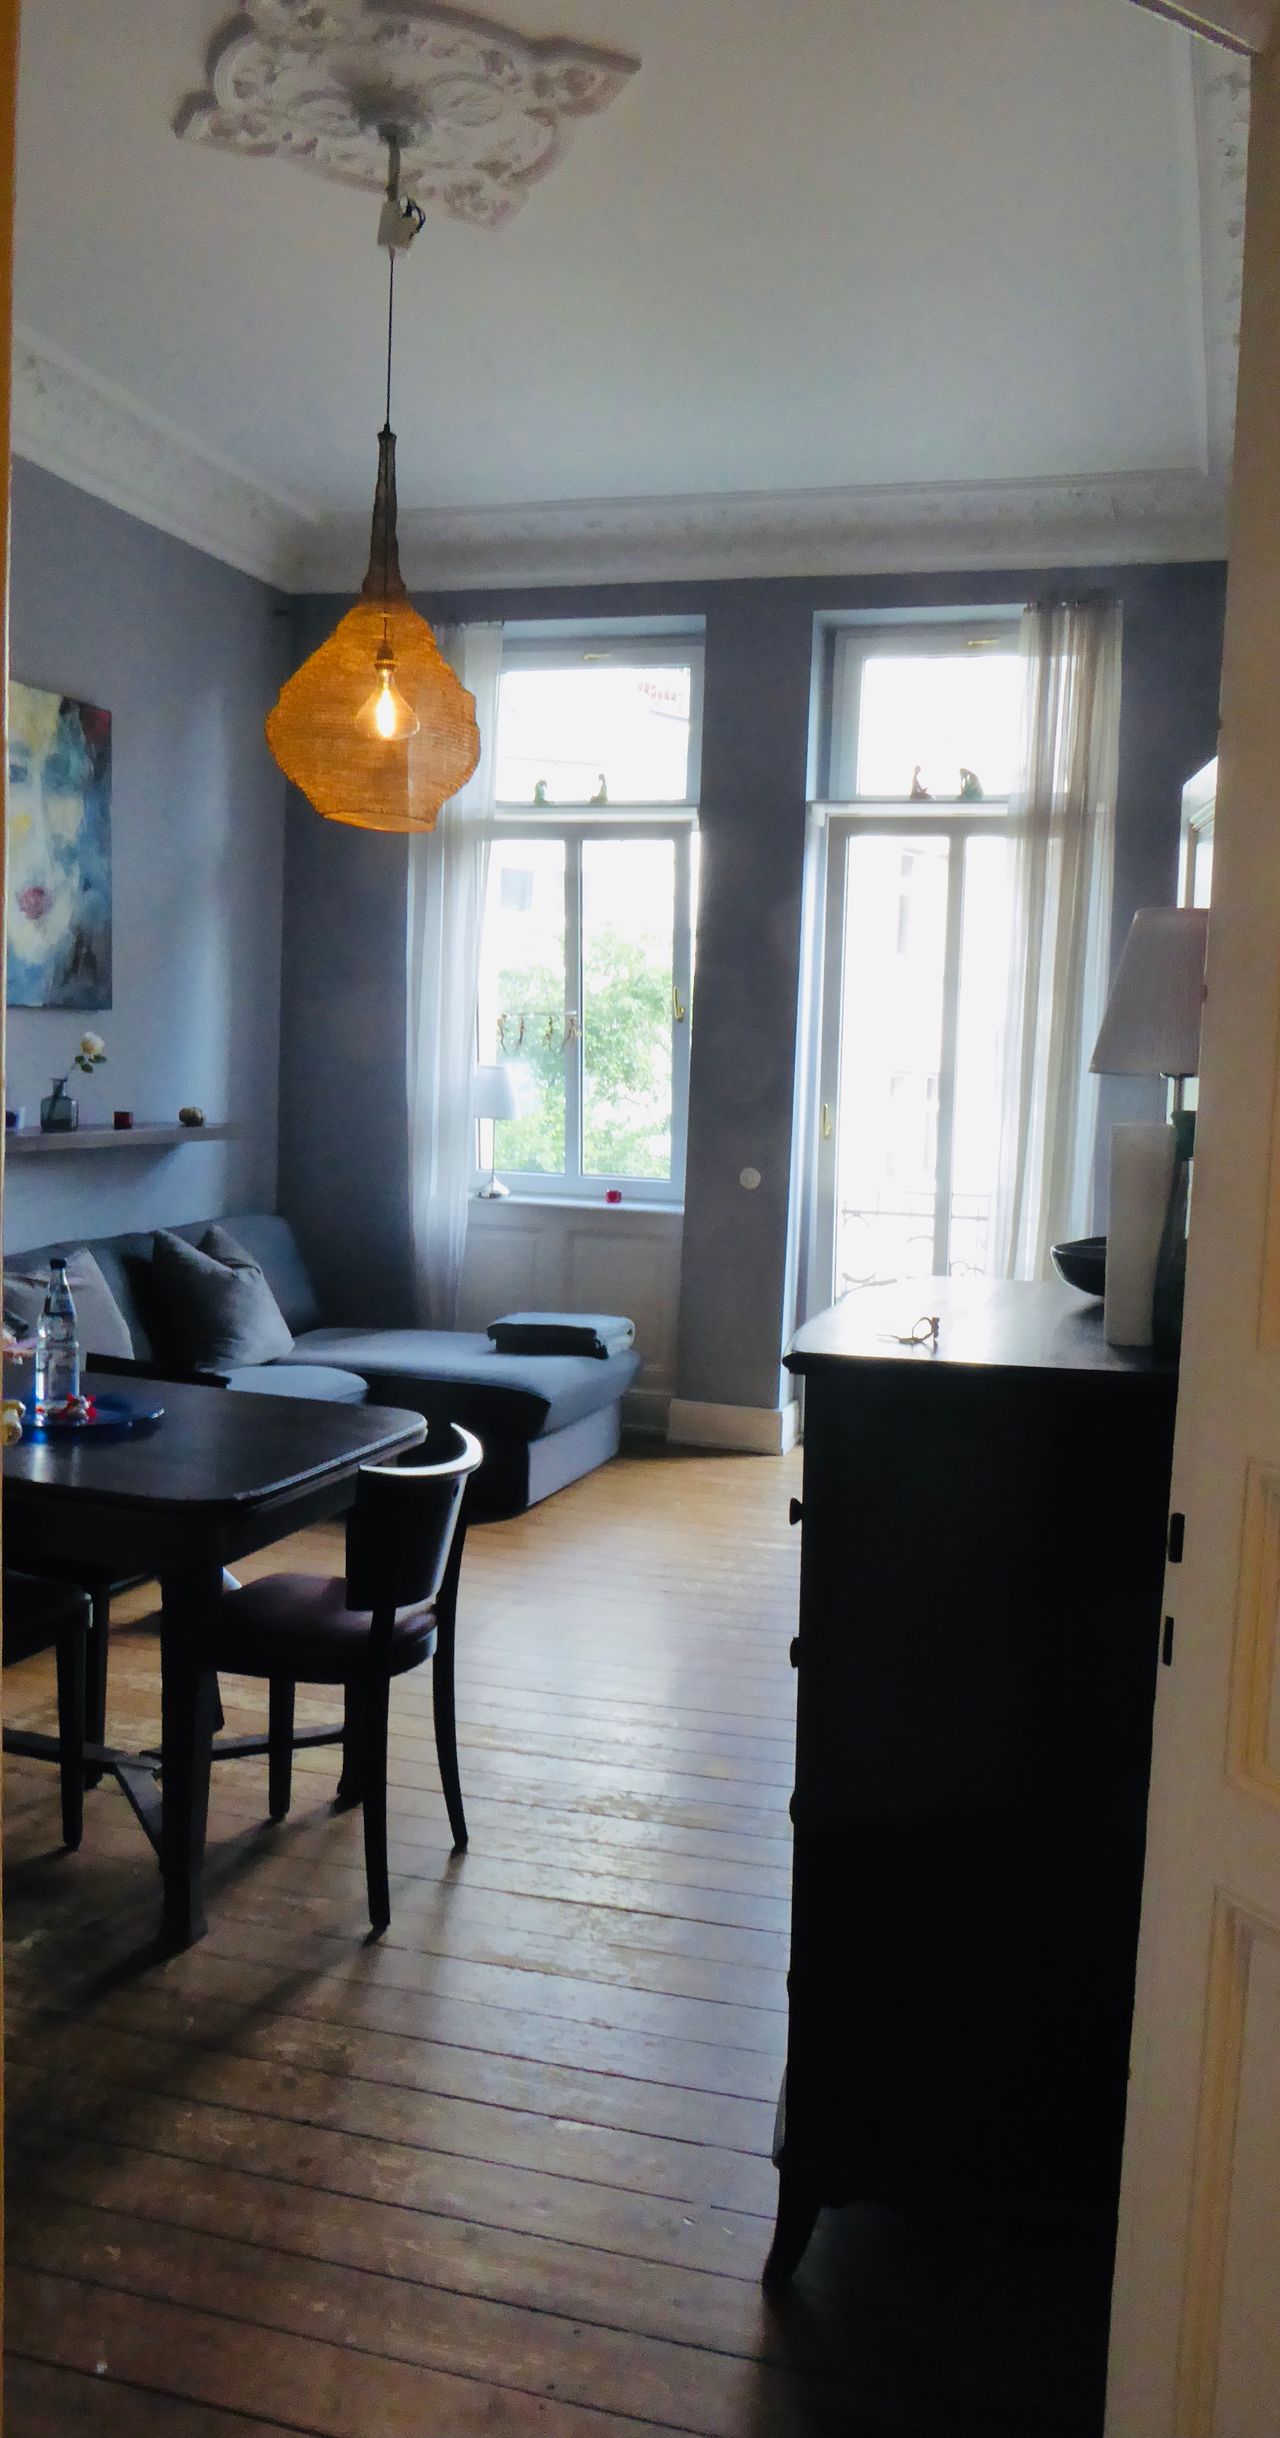 Charming domicile in Wiesbaden city center